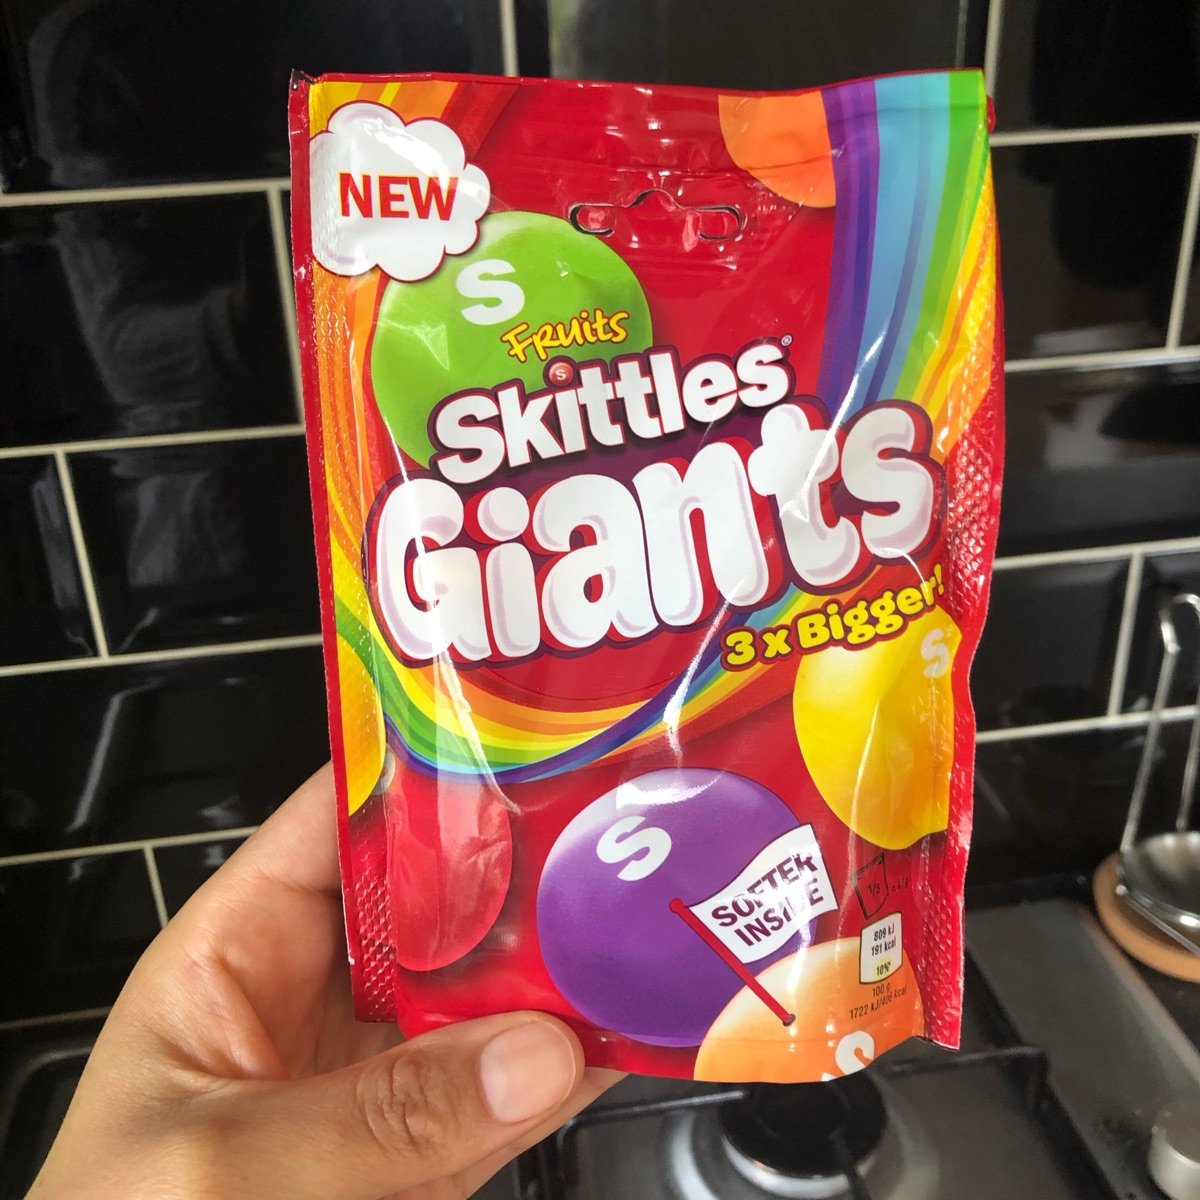 How many skittles are in a bag? - Quora